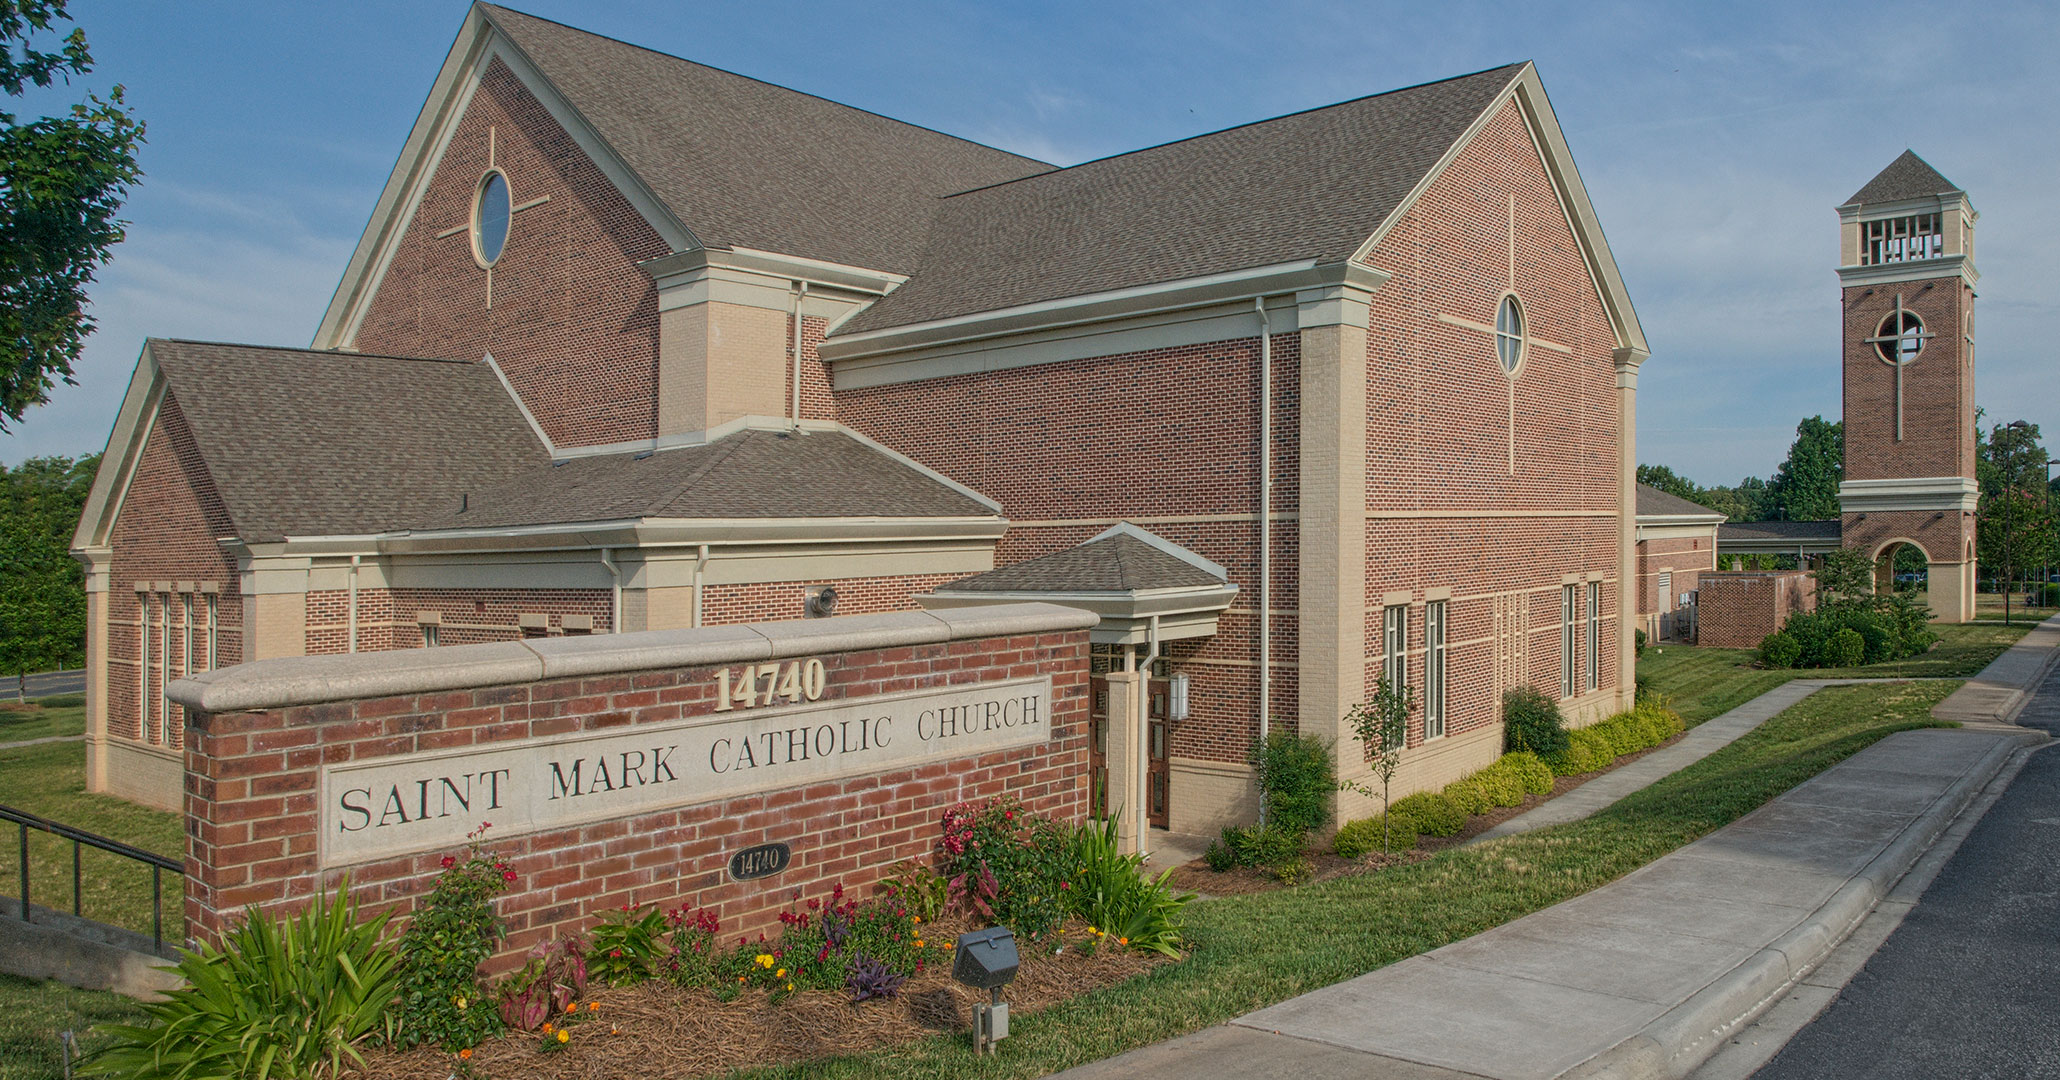 Boudreaux architects worked with St. Mark Catholic Church to design a new church sanctuary.